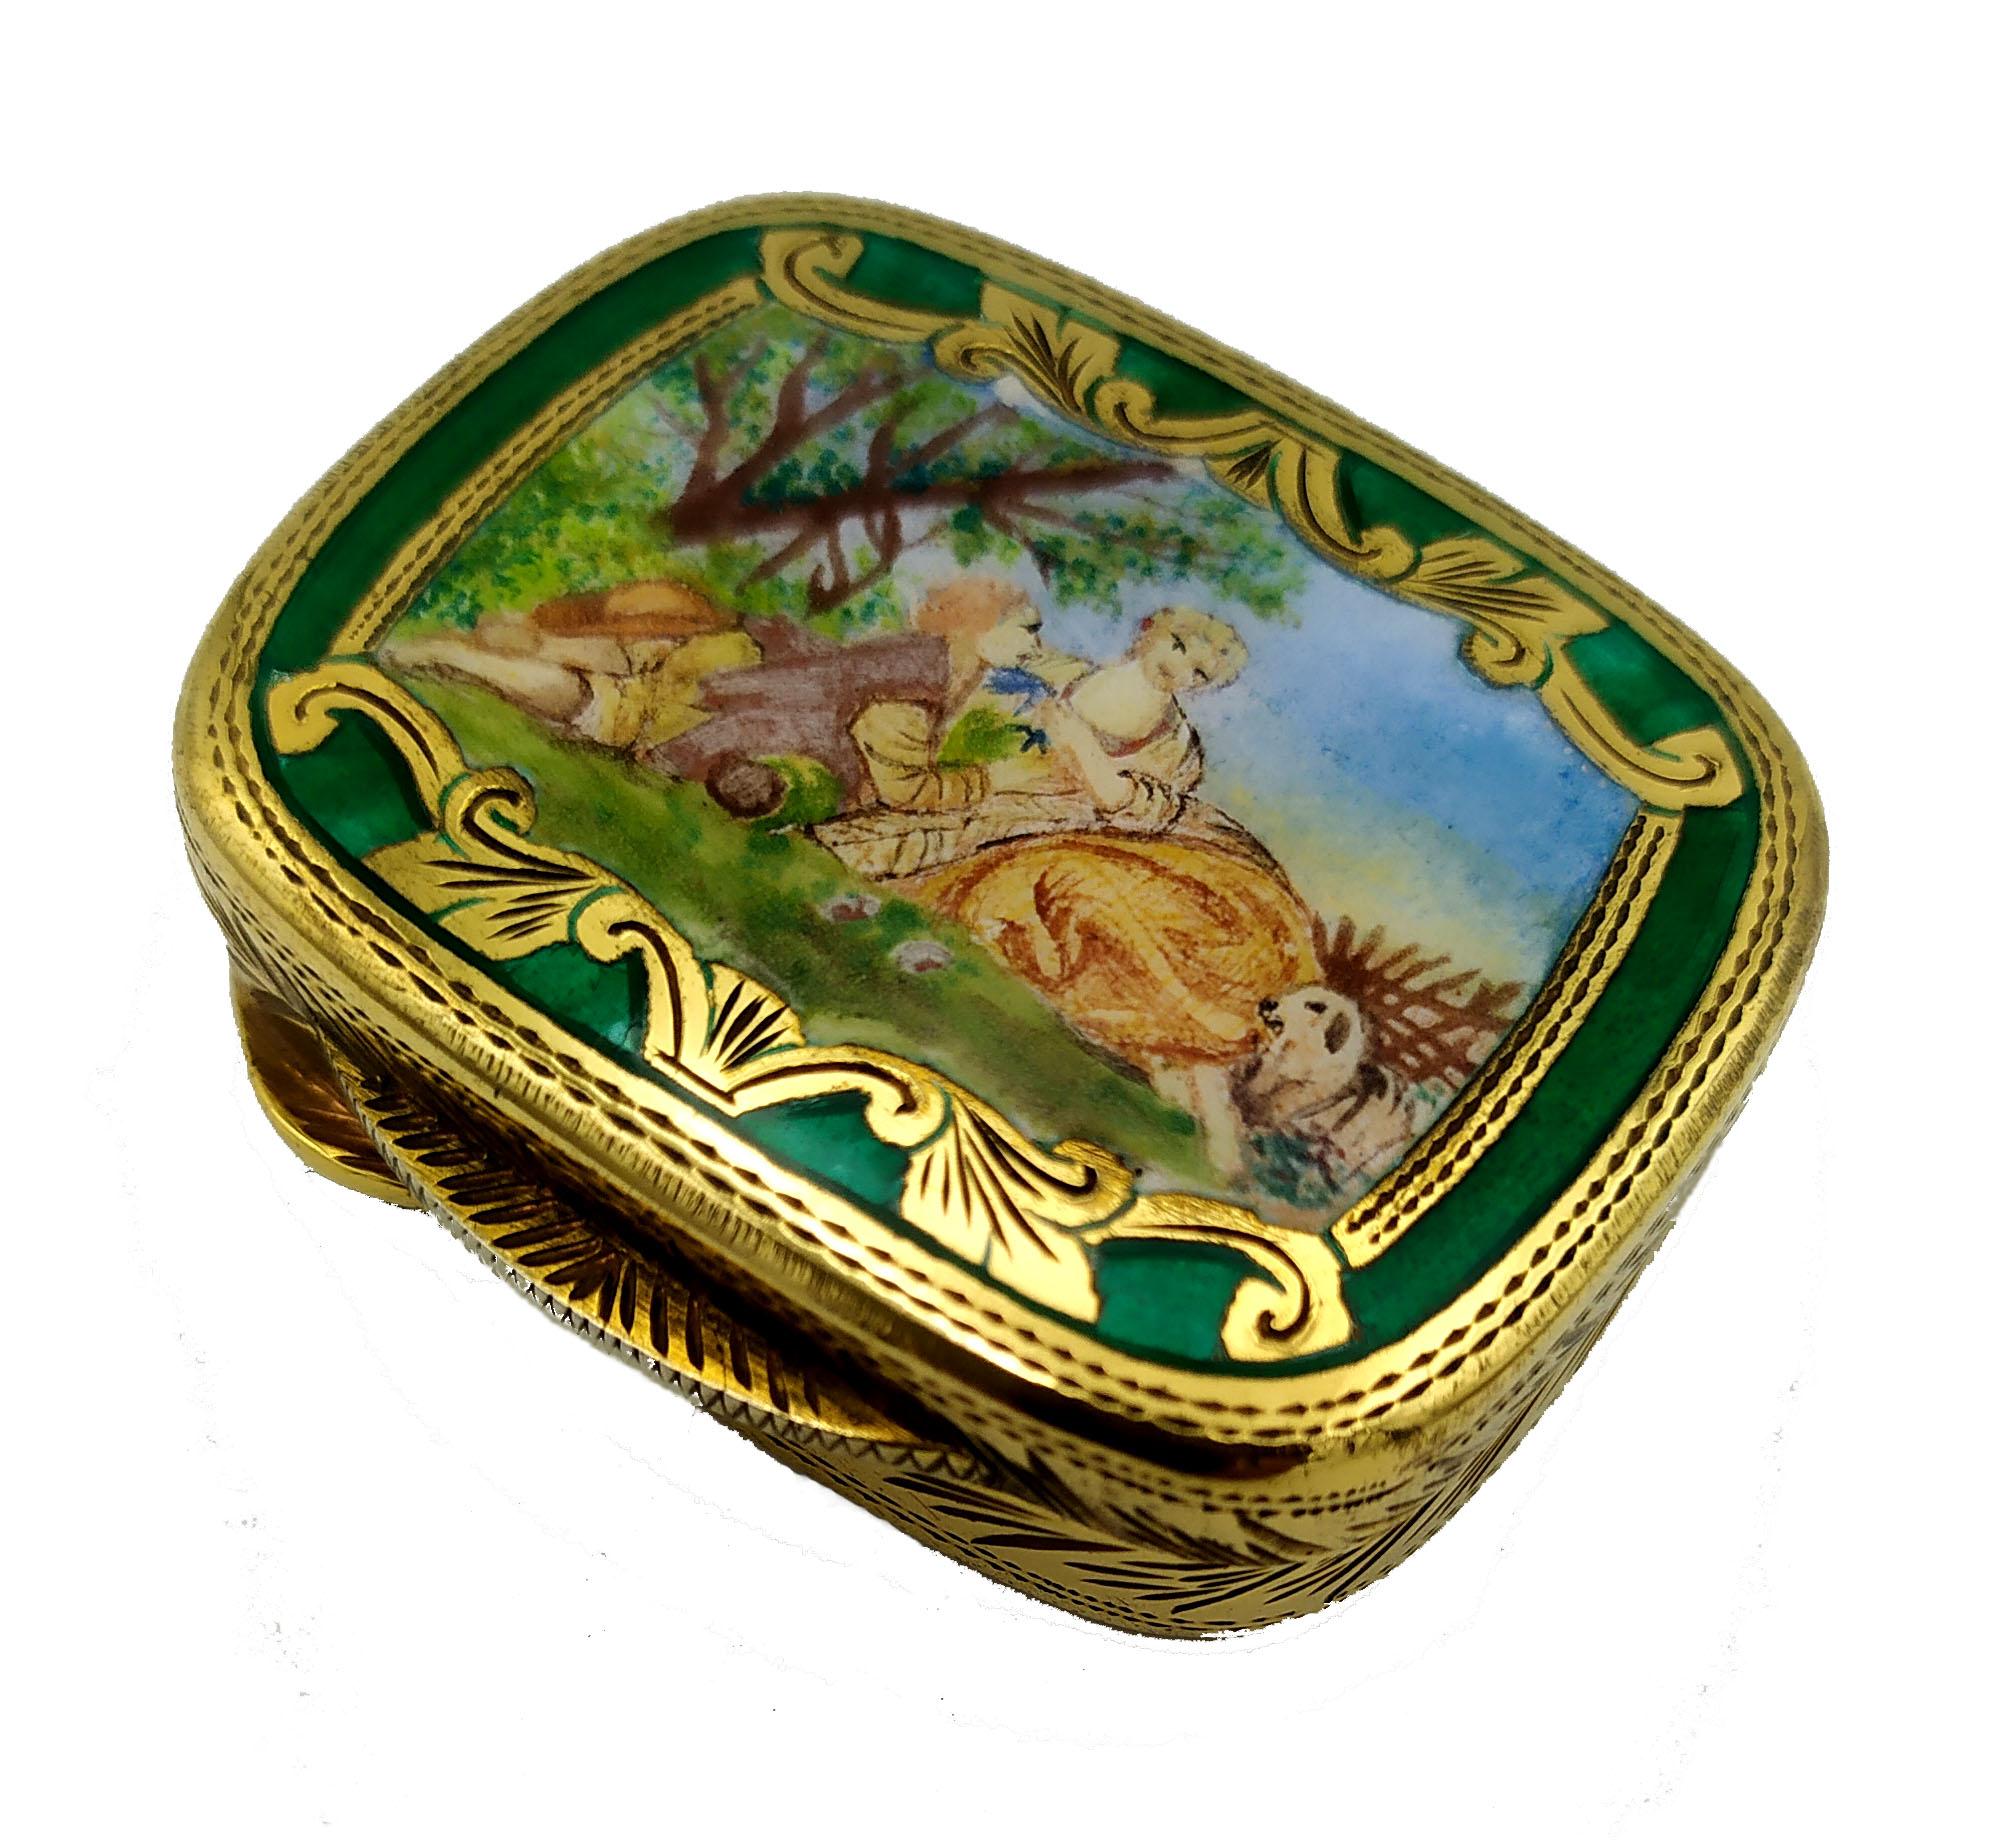 Rectangular rounded pill box in 925/1000 sterling silver gold plated with hand painted miniature fire-enamelled in Louis XVI style, second half of the 18th century, and fine hand-engravings. Measure cm. 3.5 x 4.3 cm high. 1.4. Weight gr. 40.